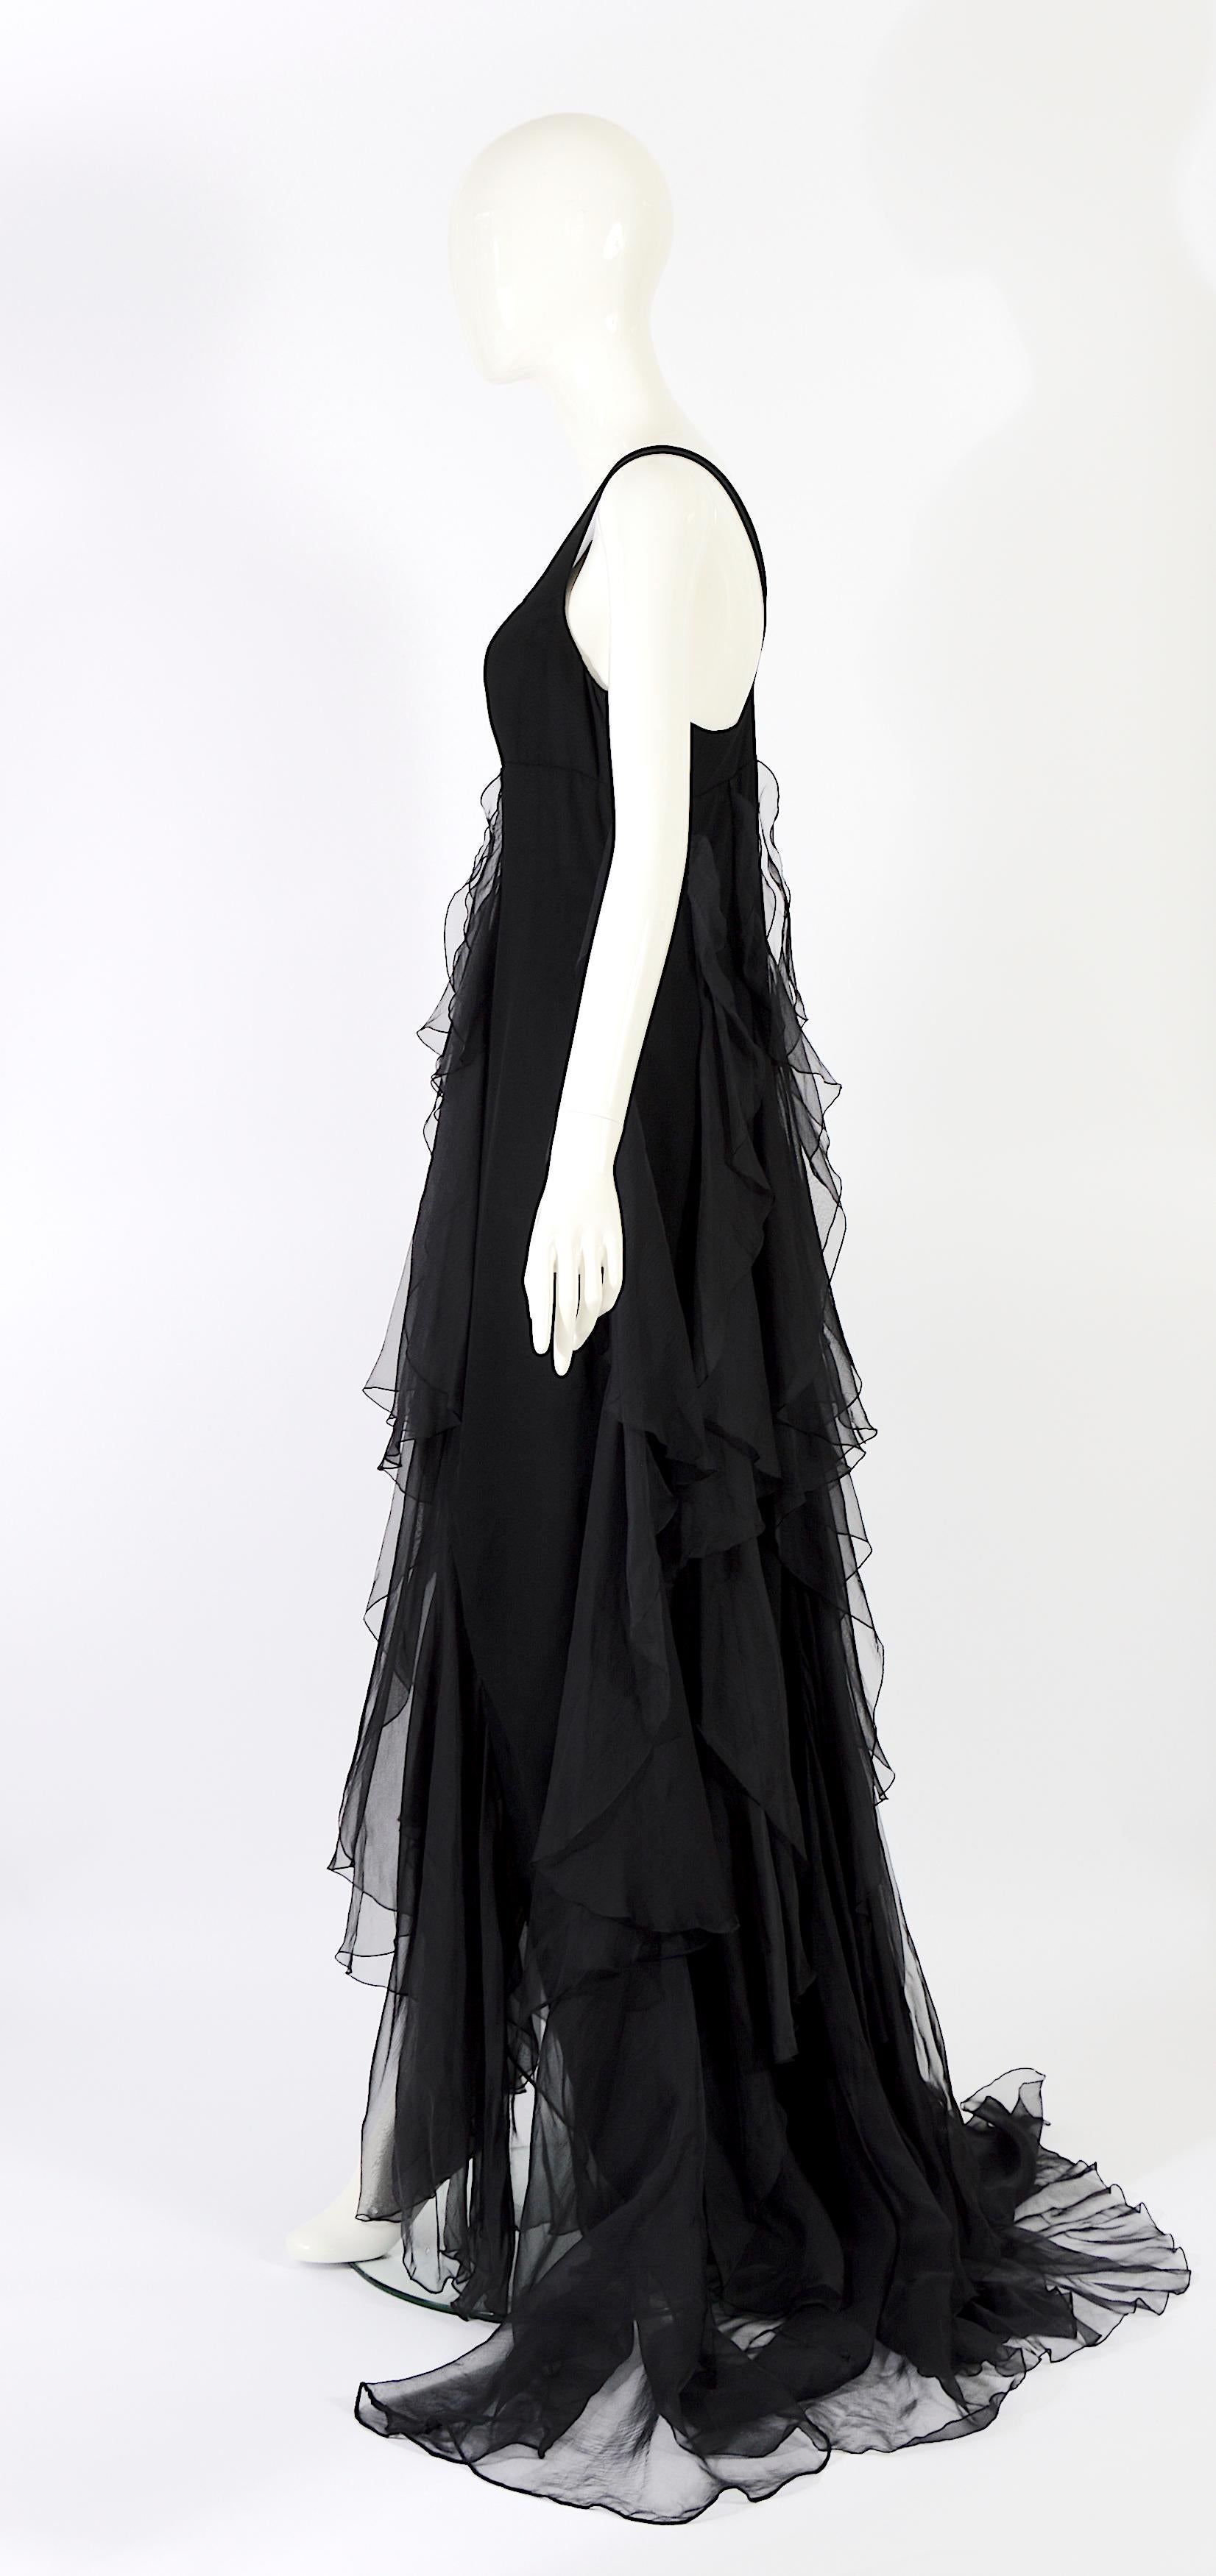 Women's Christian Dior by Gianfranco Ferre S/S 1994 vintage black silk evening dress For Sale